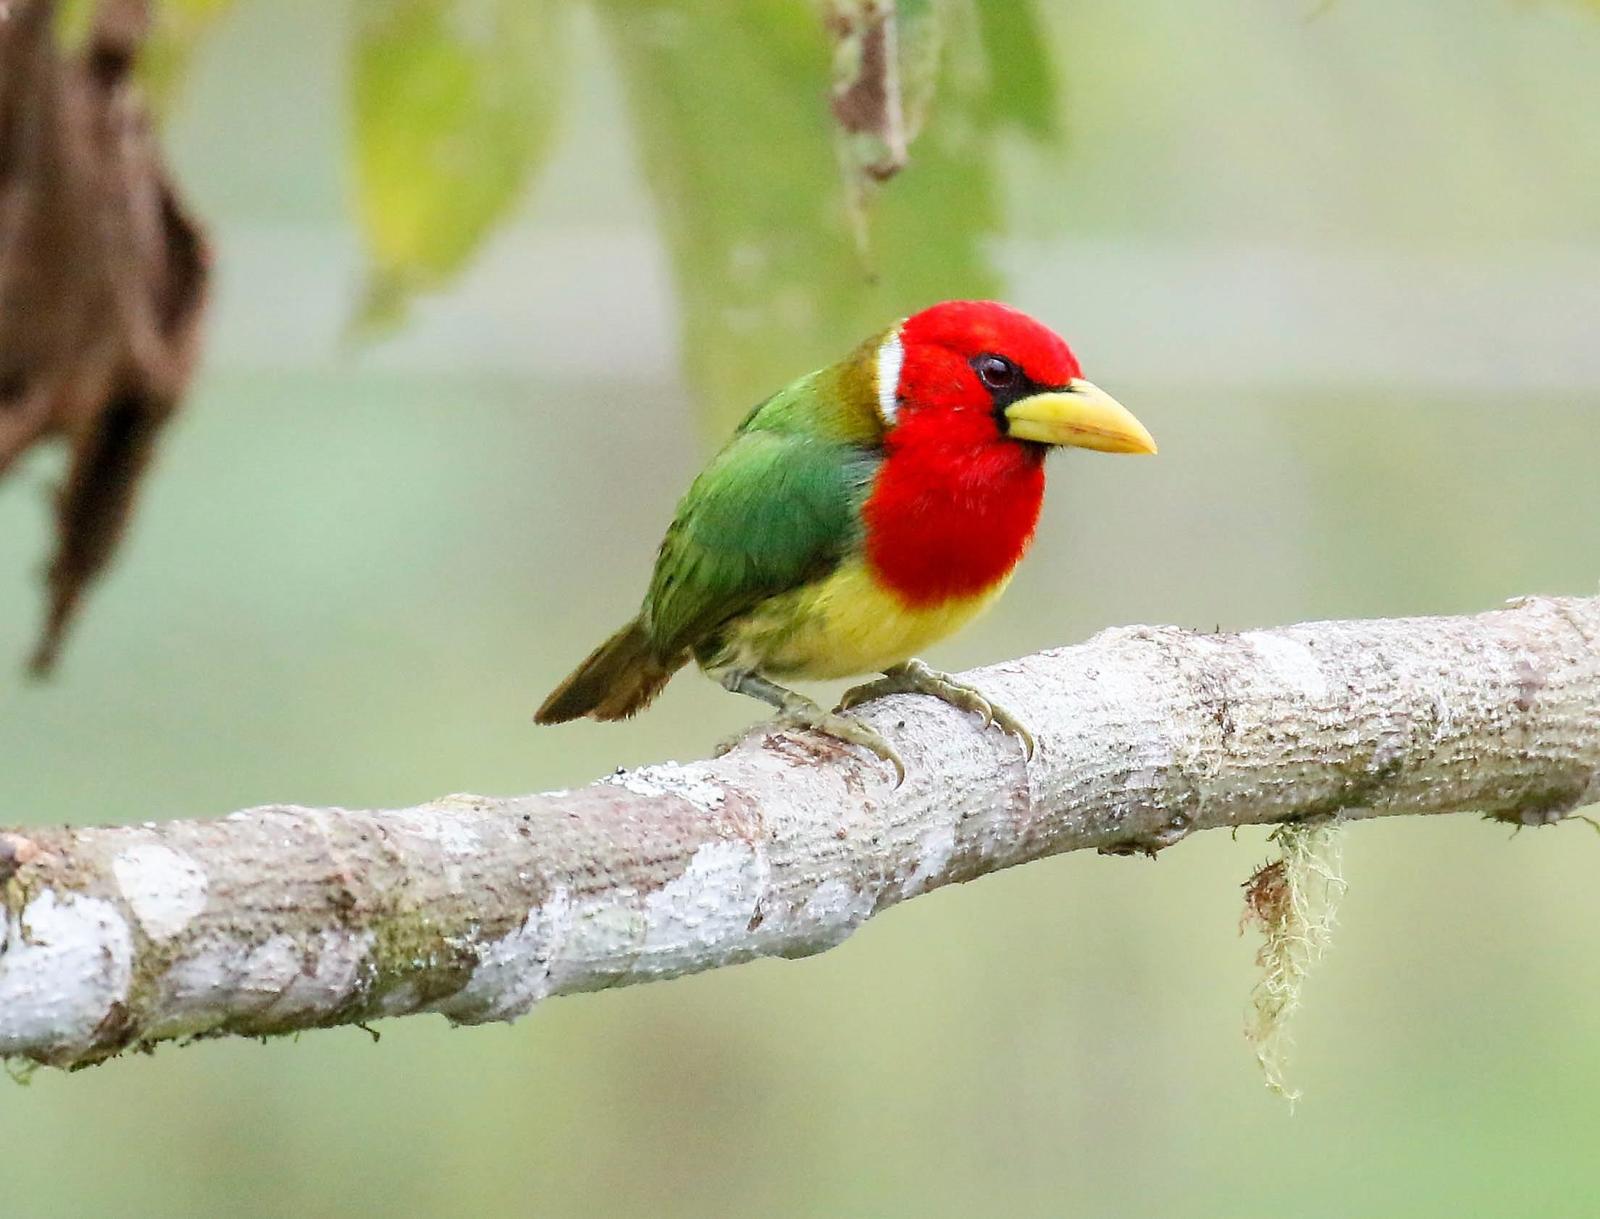 Red-headed Barbet Photo by Thomas Driscoll